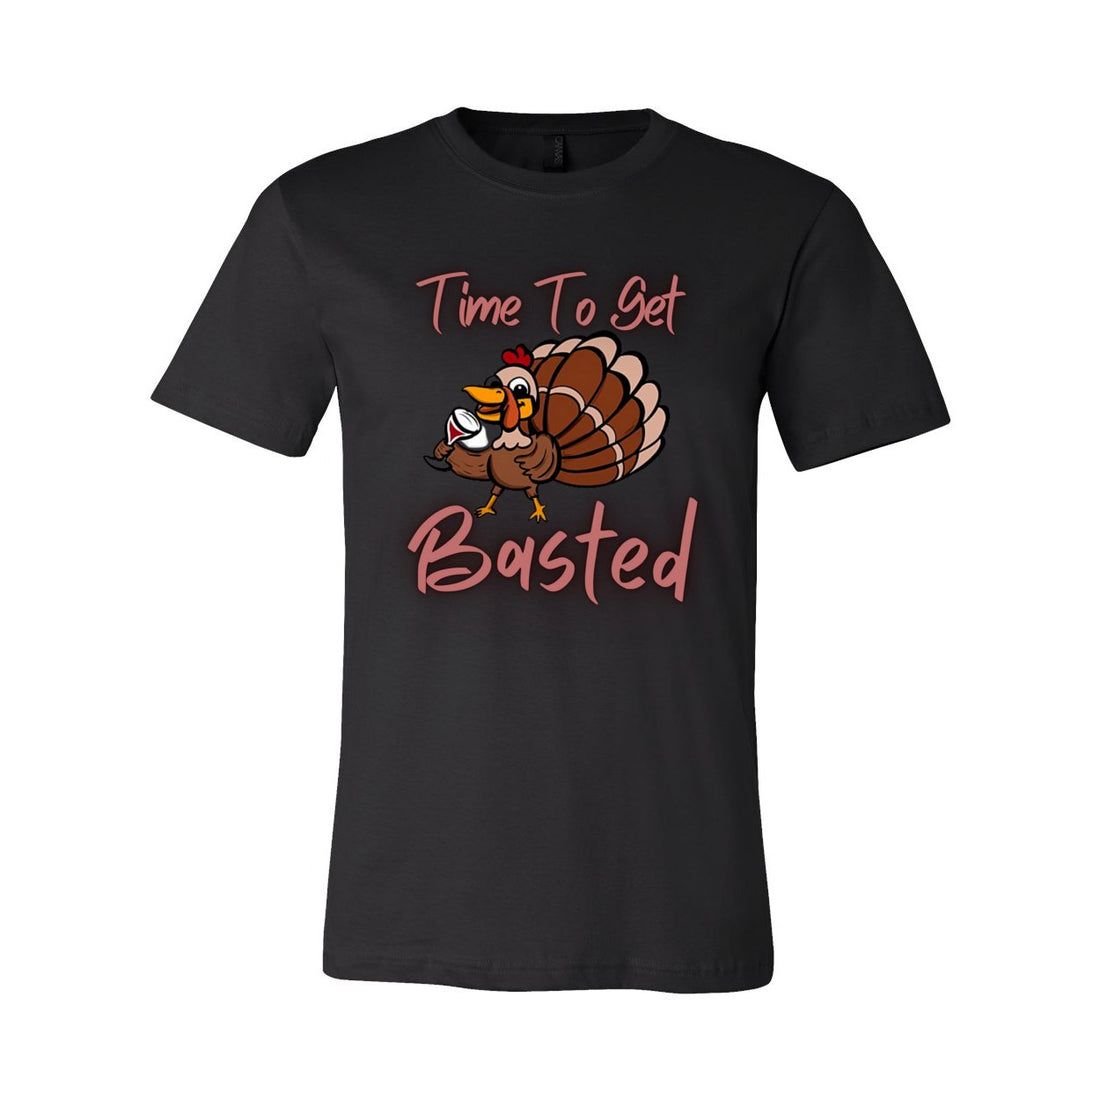 Time To Get Basted Short Sleeve Jersey Tee - T-Shirts - Positively Sassy - Time To Get Basted Short Sleeve Jersey Tee